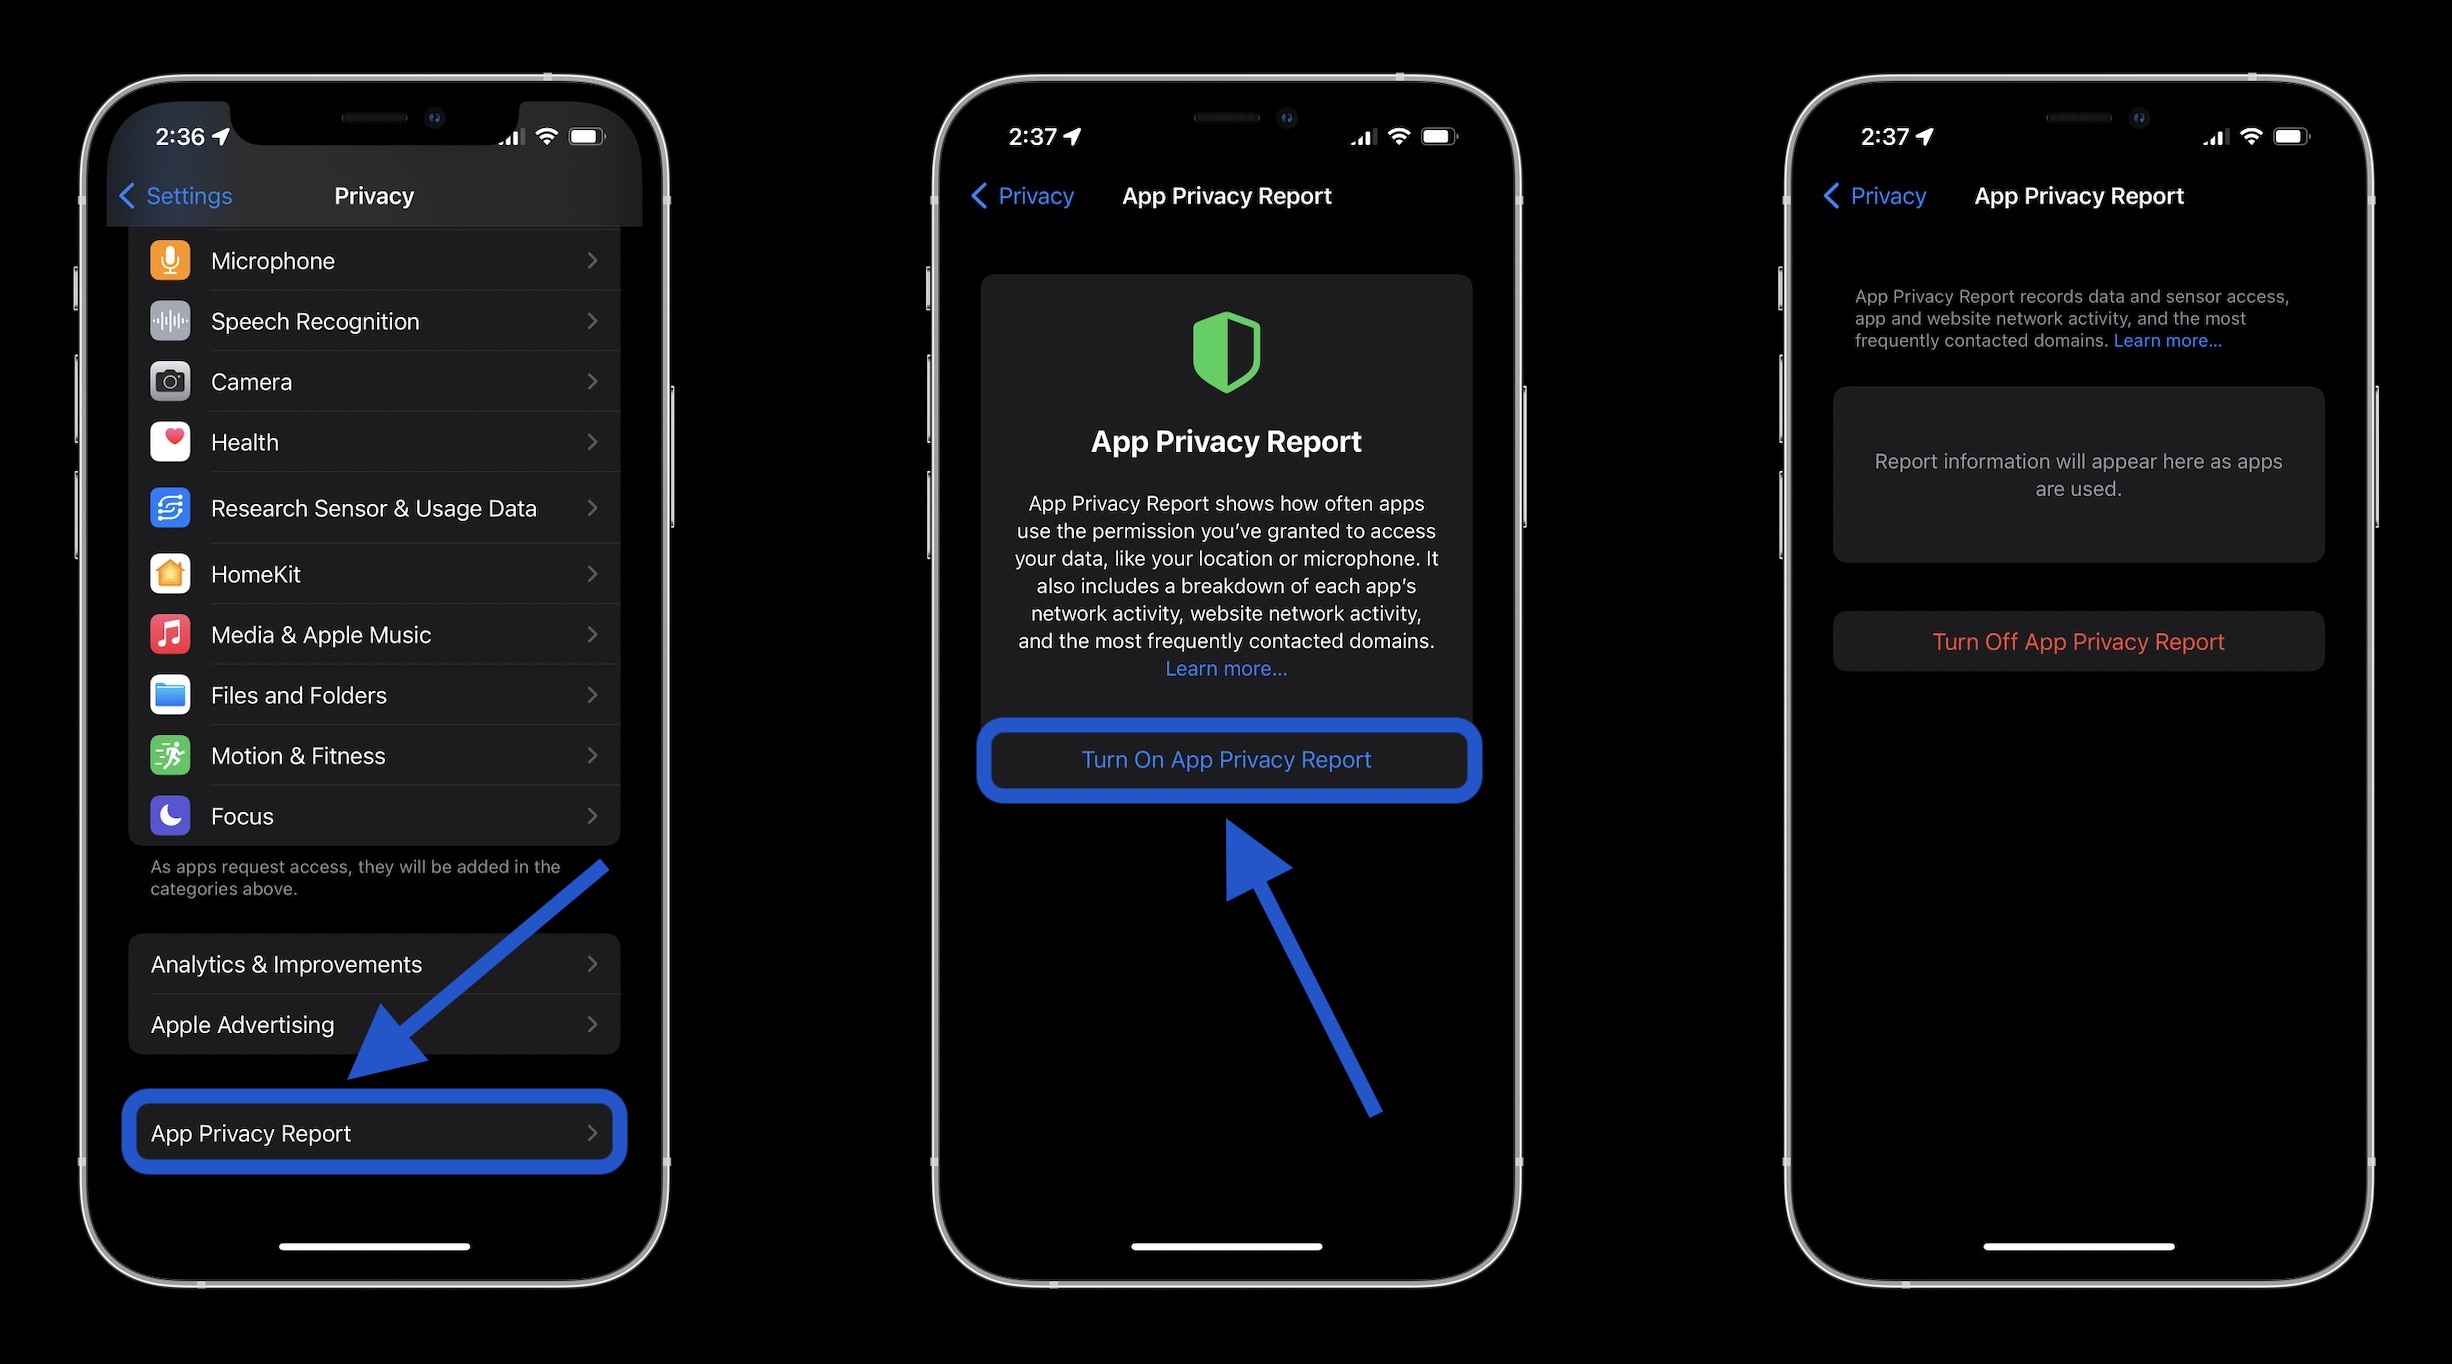 How to turn on iPhone App Privacy Report - settings > privacy > app privacy report - turn on